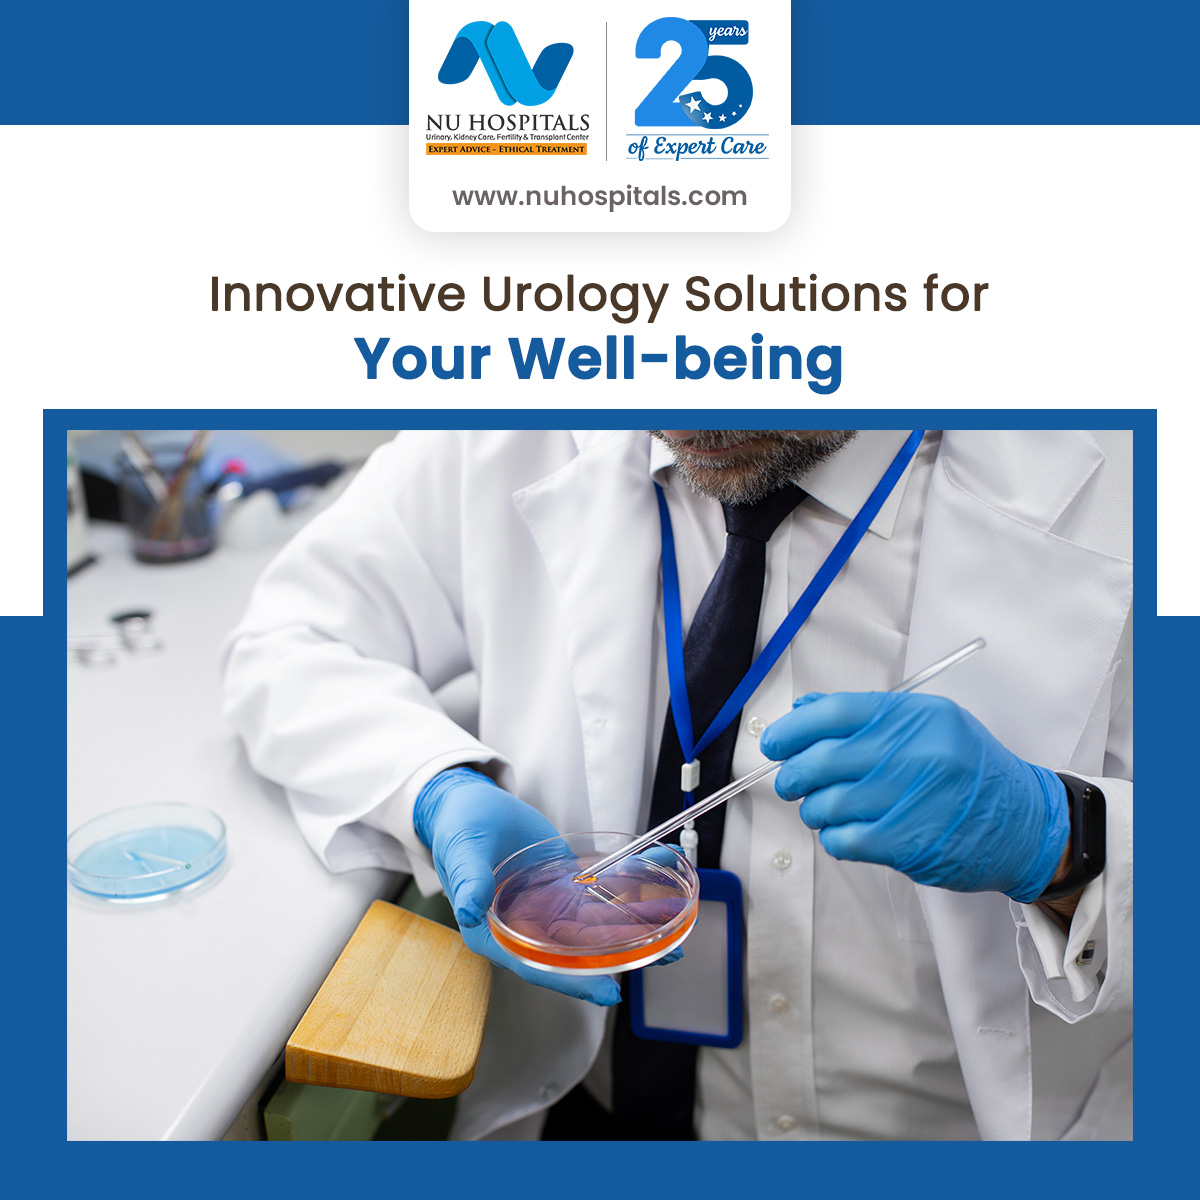 💡At NU Hospitals, we believe in bringing innovation to urological care.

🩺 Our Urology Centre is equipped with cutting-edge technology and a team of experienced urologists.👨‍⚕️

Your path to urological well-being starts here!🏃

#InnovativeUrology #NUHospitals #UrologyExcellence